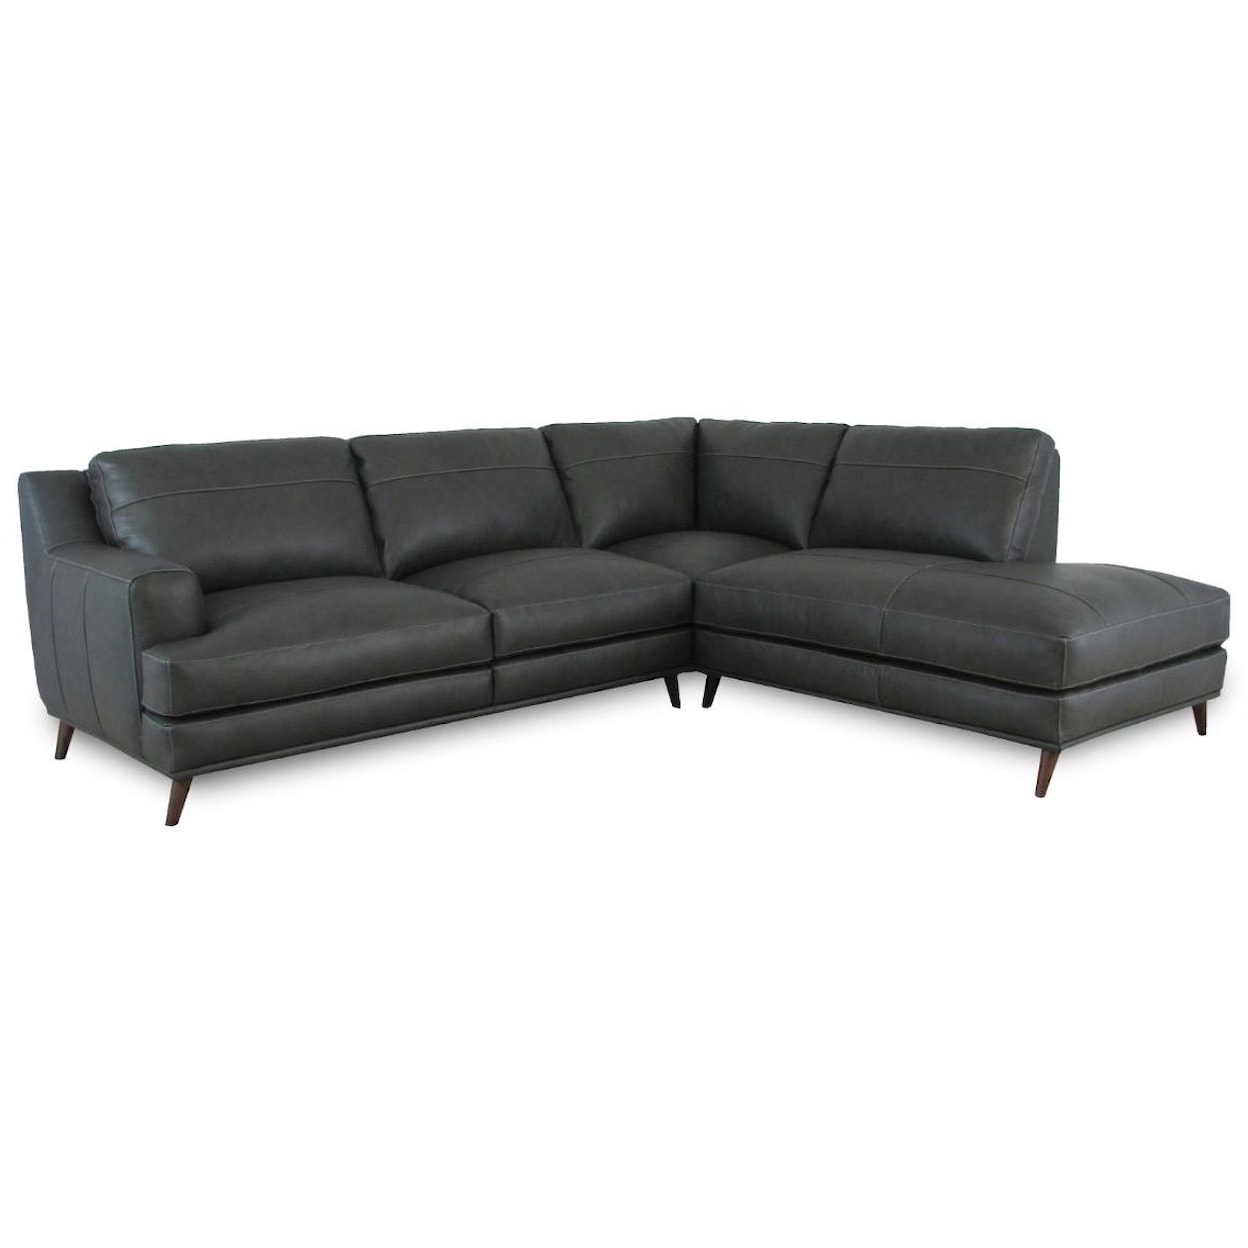 Soft Line San Marco San Marco Sectional